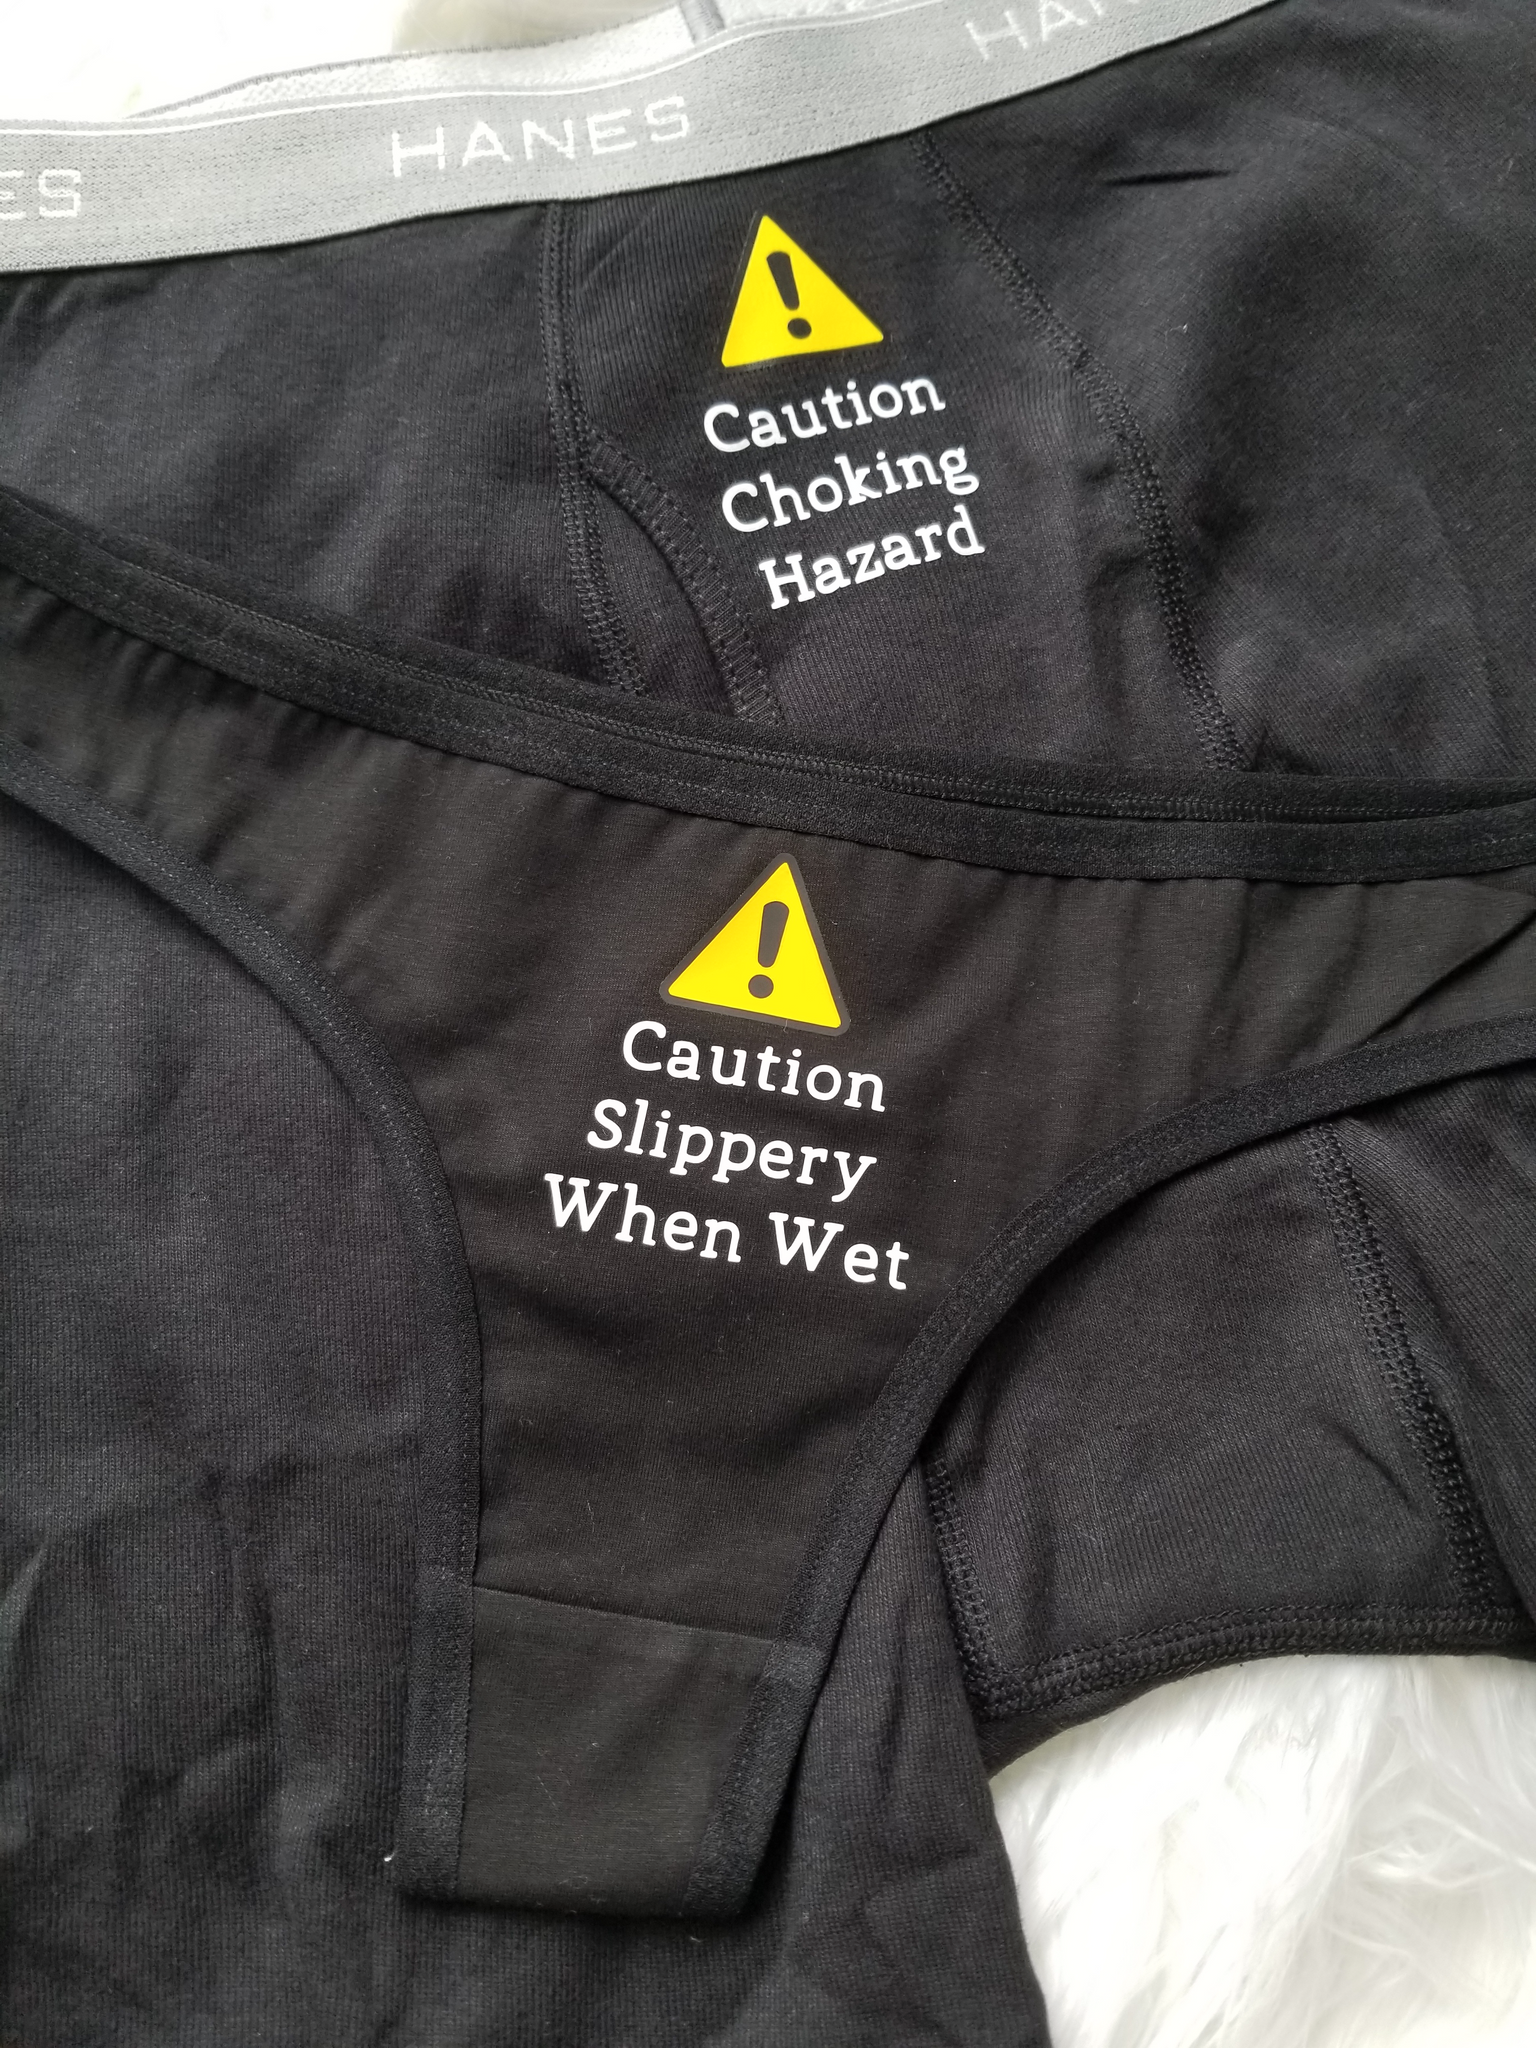  Matching Couples Underwear, Caution Slippery When Wet, Caution  Choking Hazard, His and Hers, Couples Gift (L, Thong, Black) : Handmade  Products